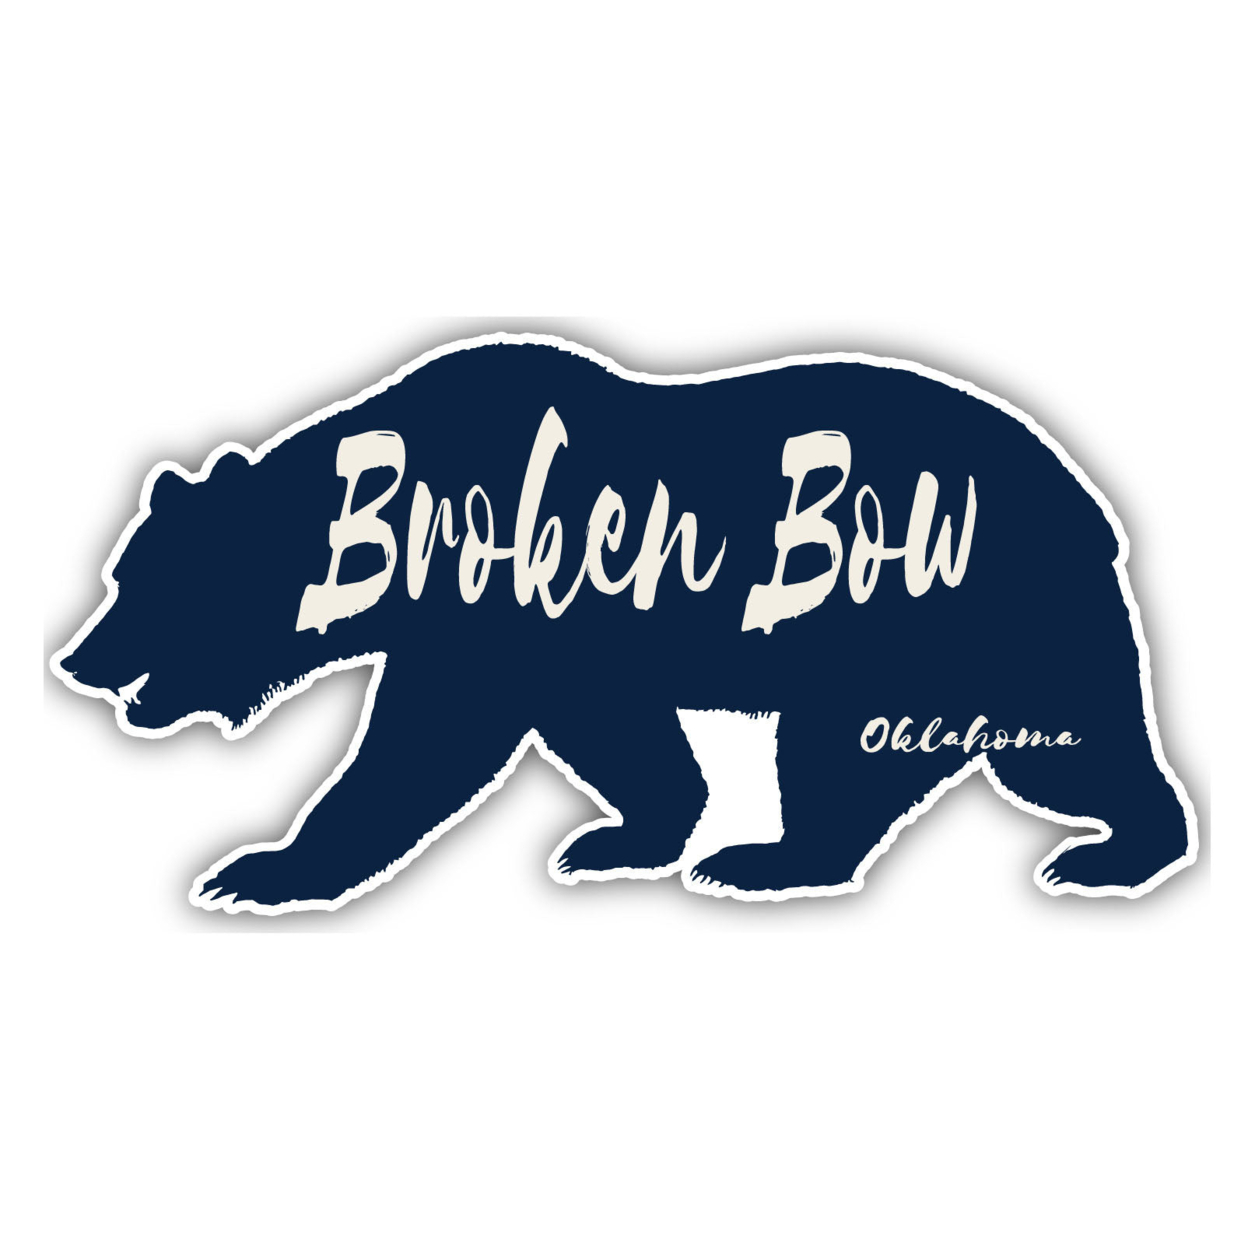 Broken Bow Oklahoma Souvenir Decorative Stickers (Choose Theme And Size) - 4-Pack, 4-Inch, Bear